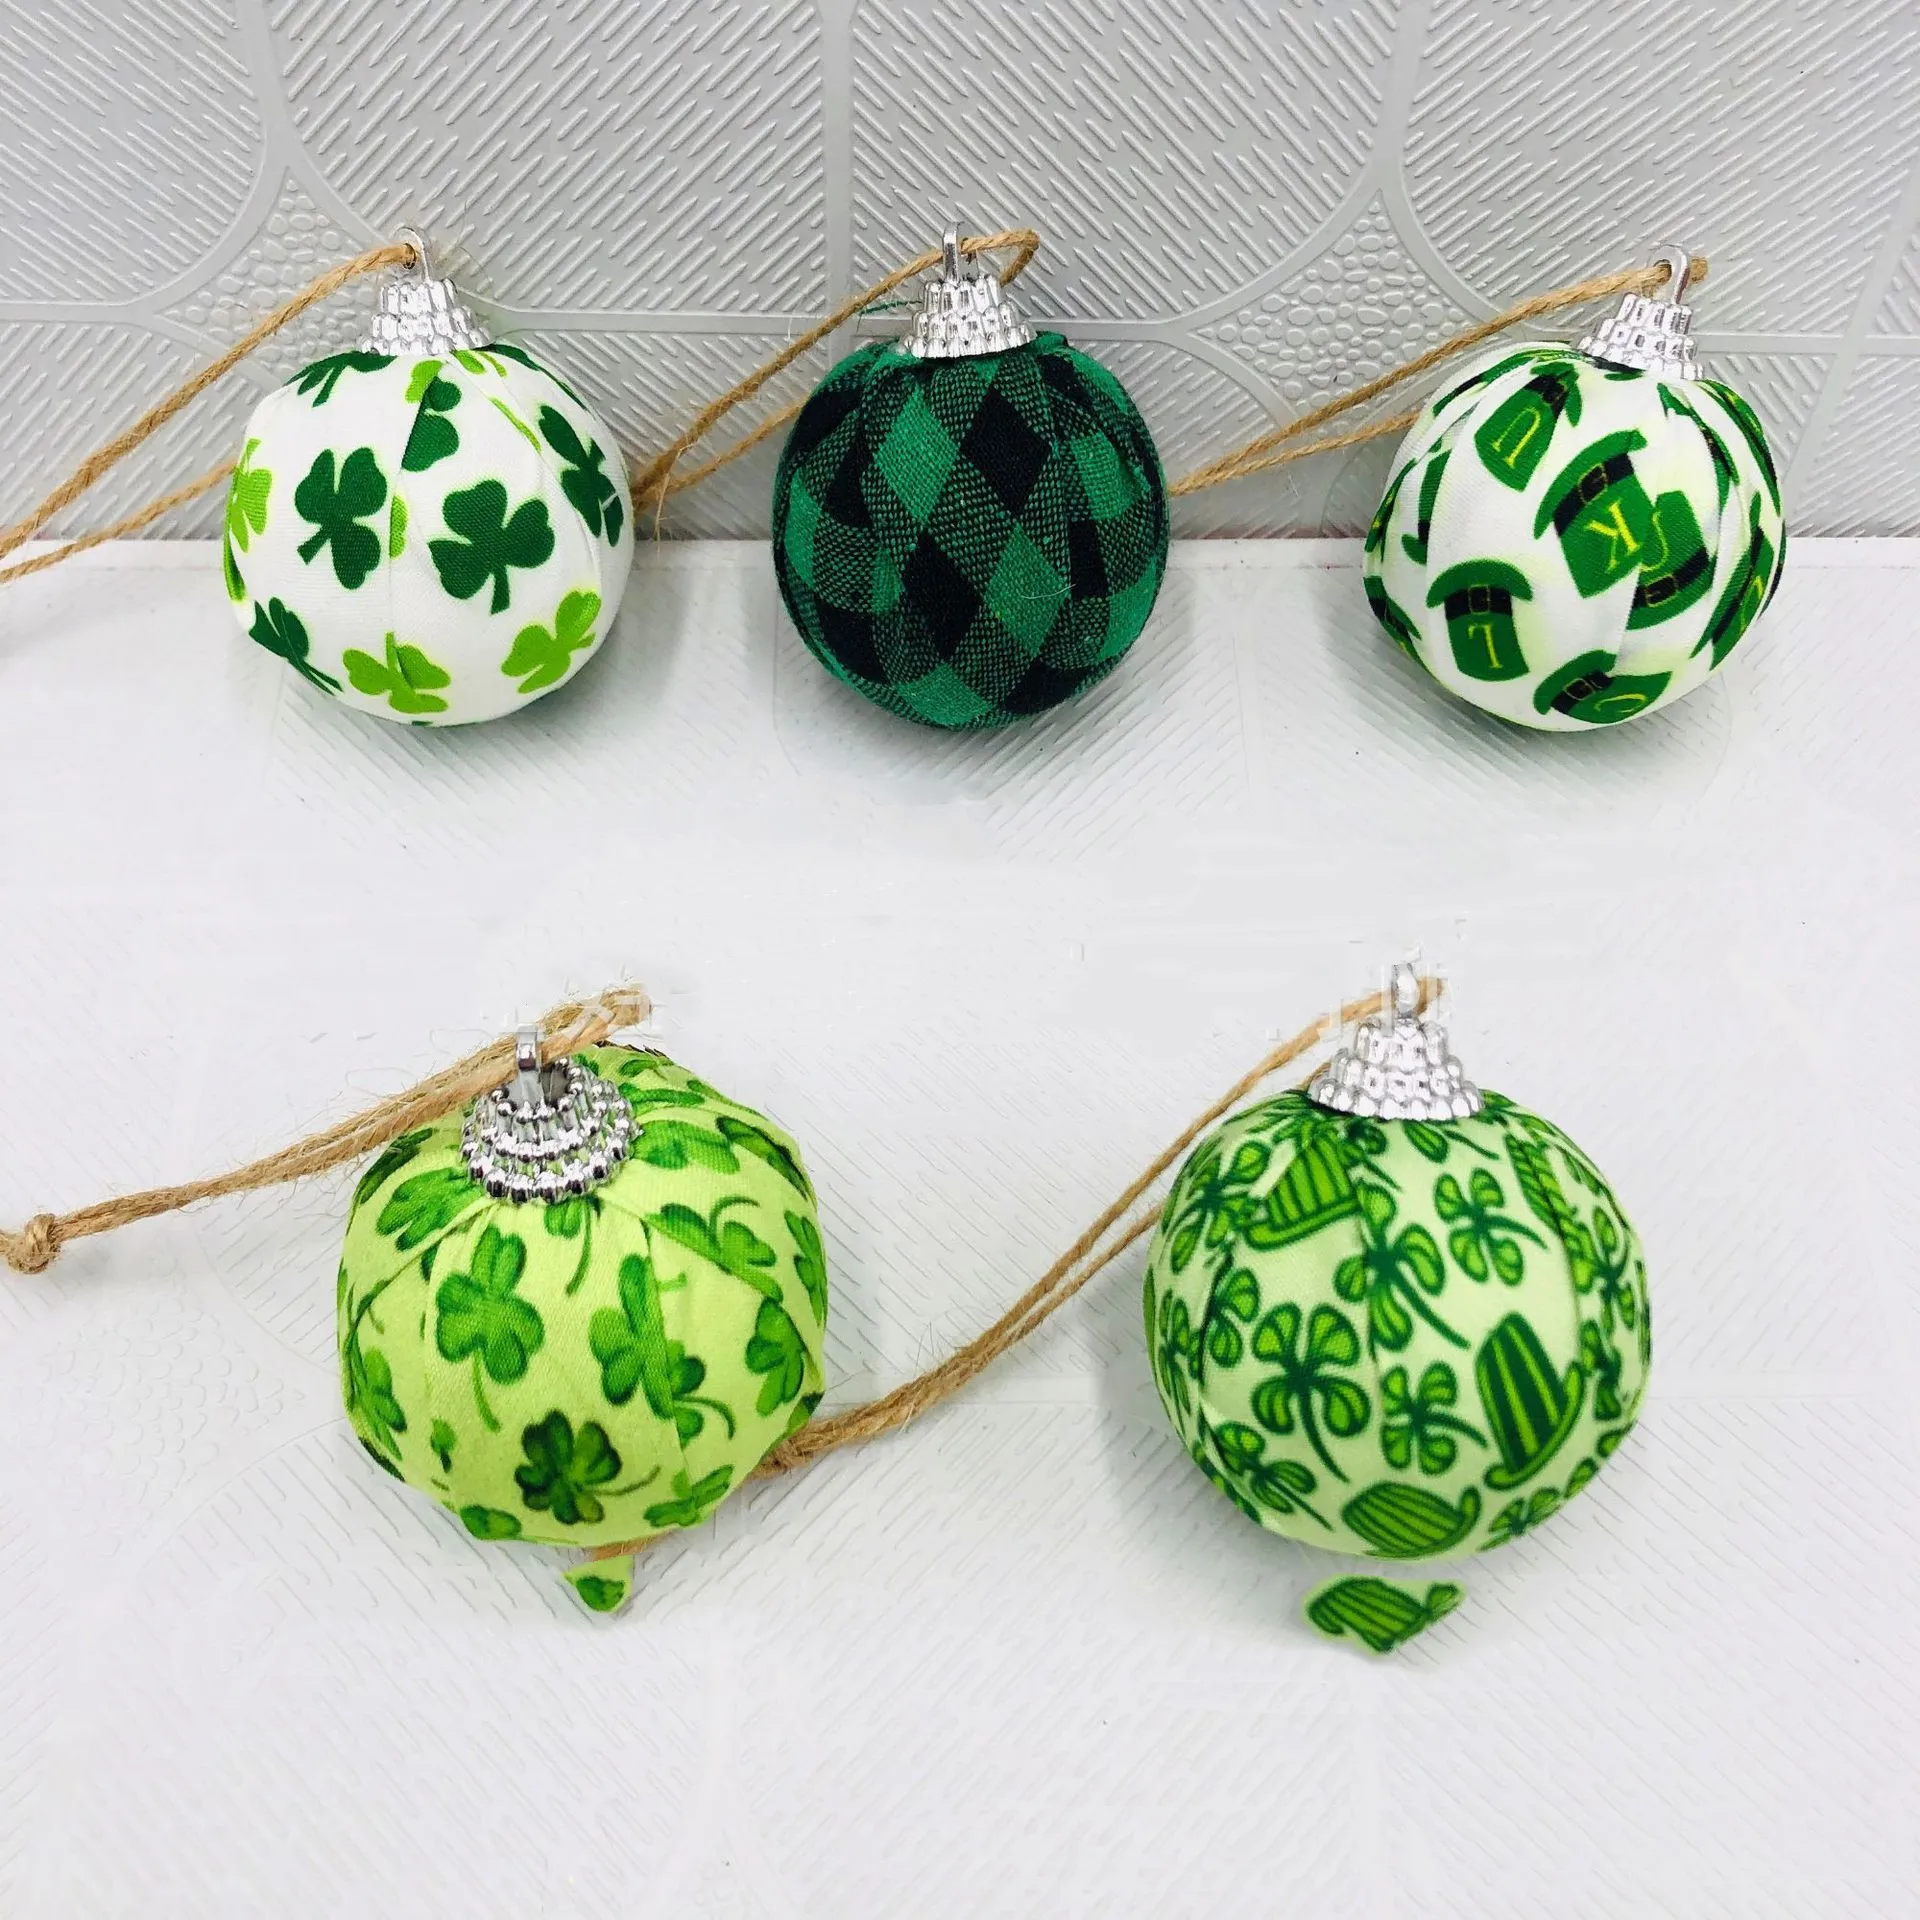 10 PCS St.Patrick Day Sequin Ball Ornament Green Shamrock Hanging Ball Ornament-Good Luck Clover Ball for Tree St.Patrick's Day